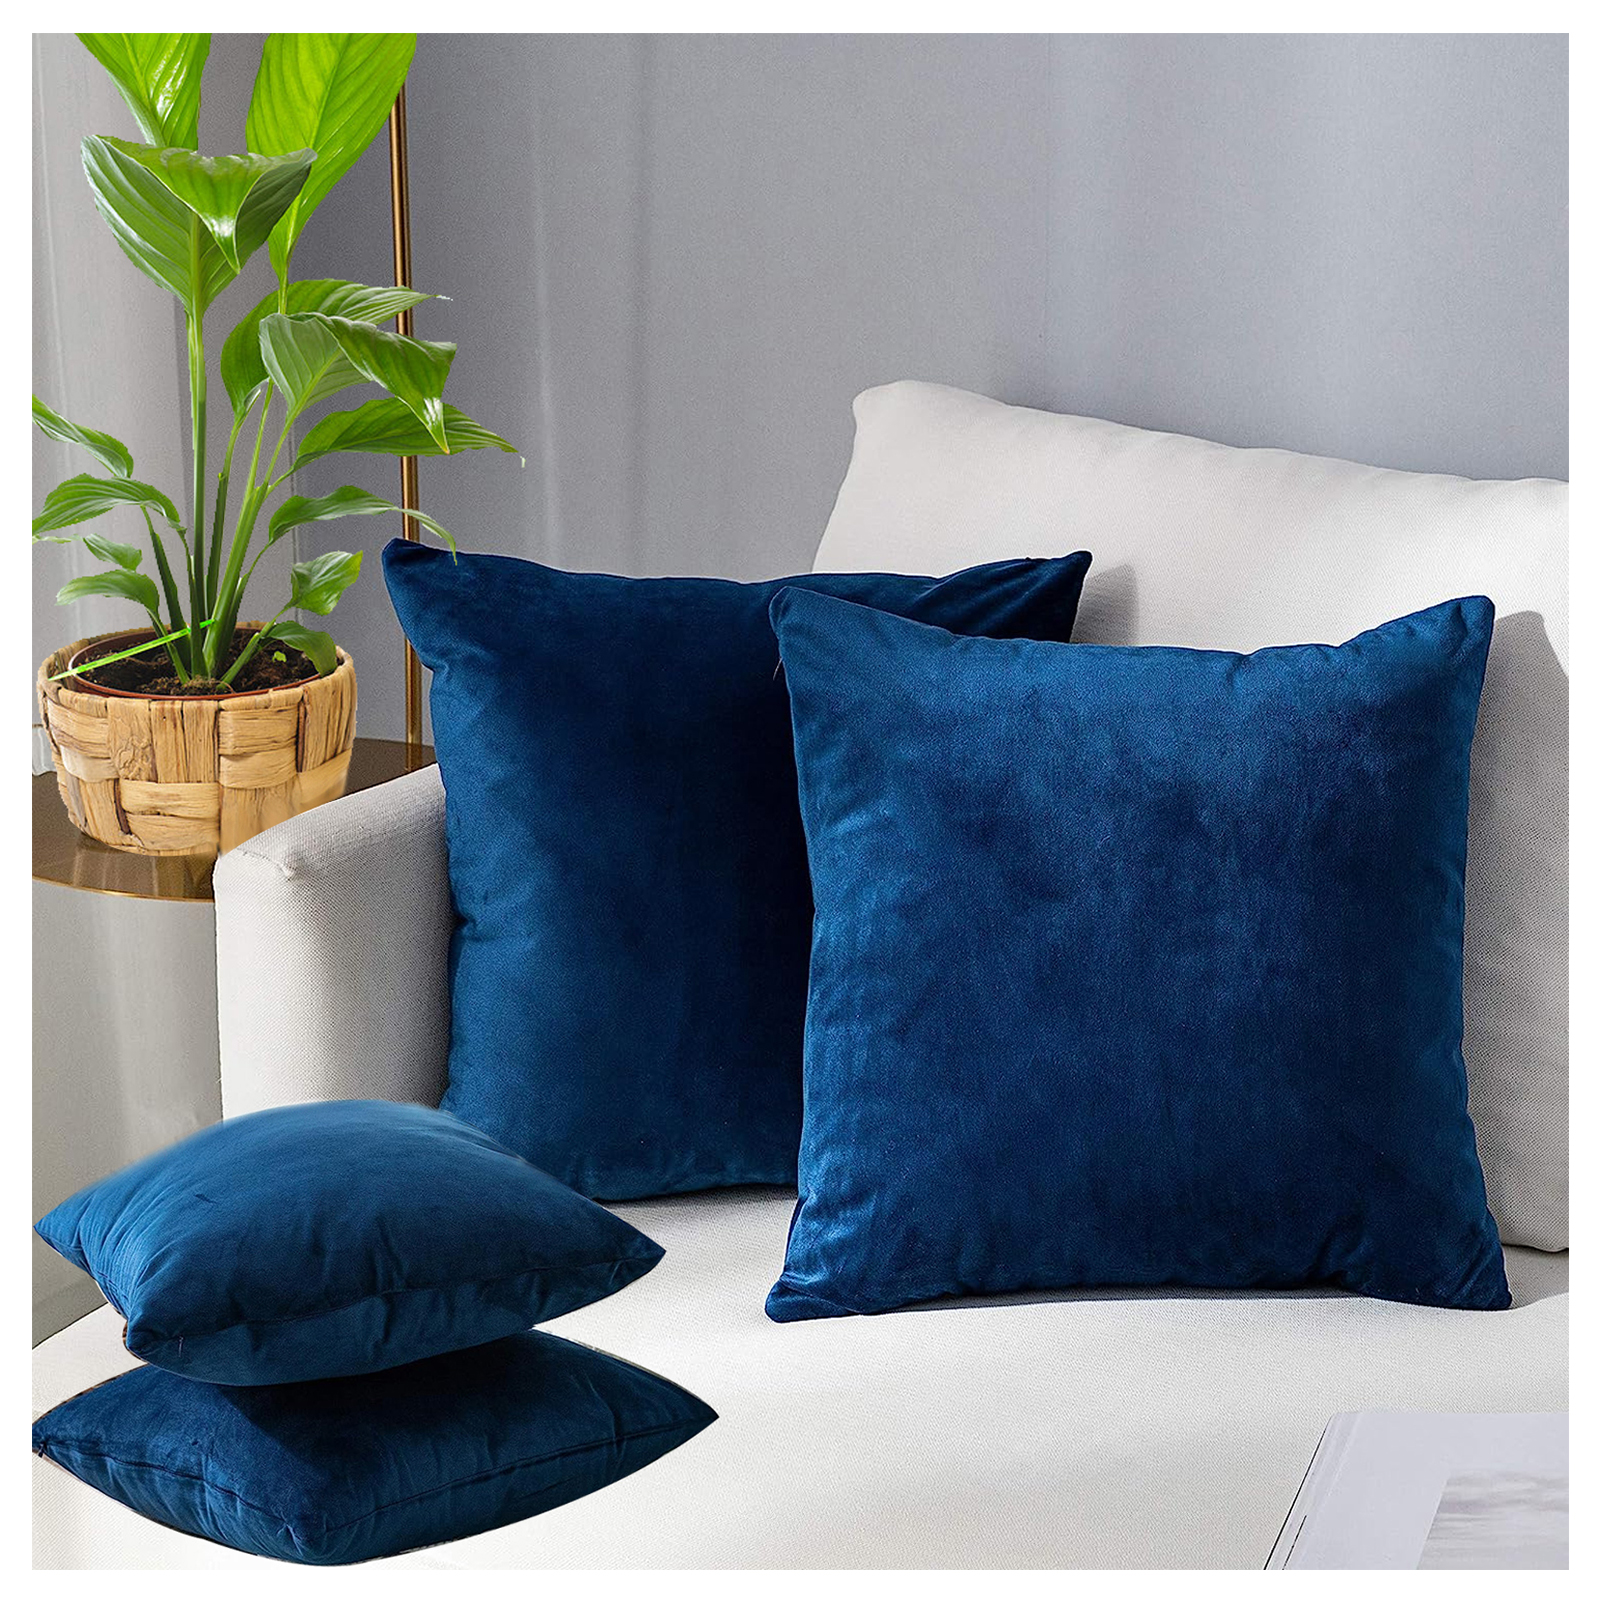 1pc Throw Pillow Insert Hypoallergenic Premium Pillow Stuffer Sham  Decorative Cushion Bed Couch Sofa for 45x45cm(18x18inch) Pillow Cover 2023  - $10.99